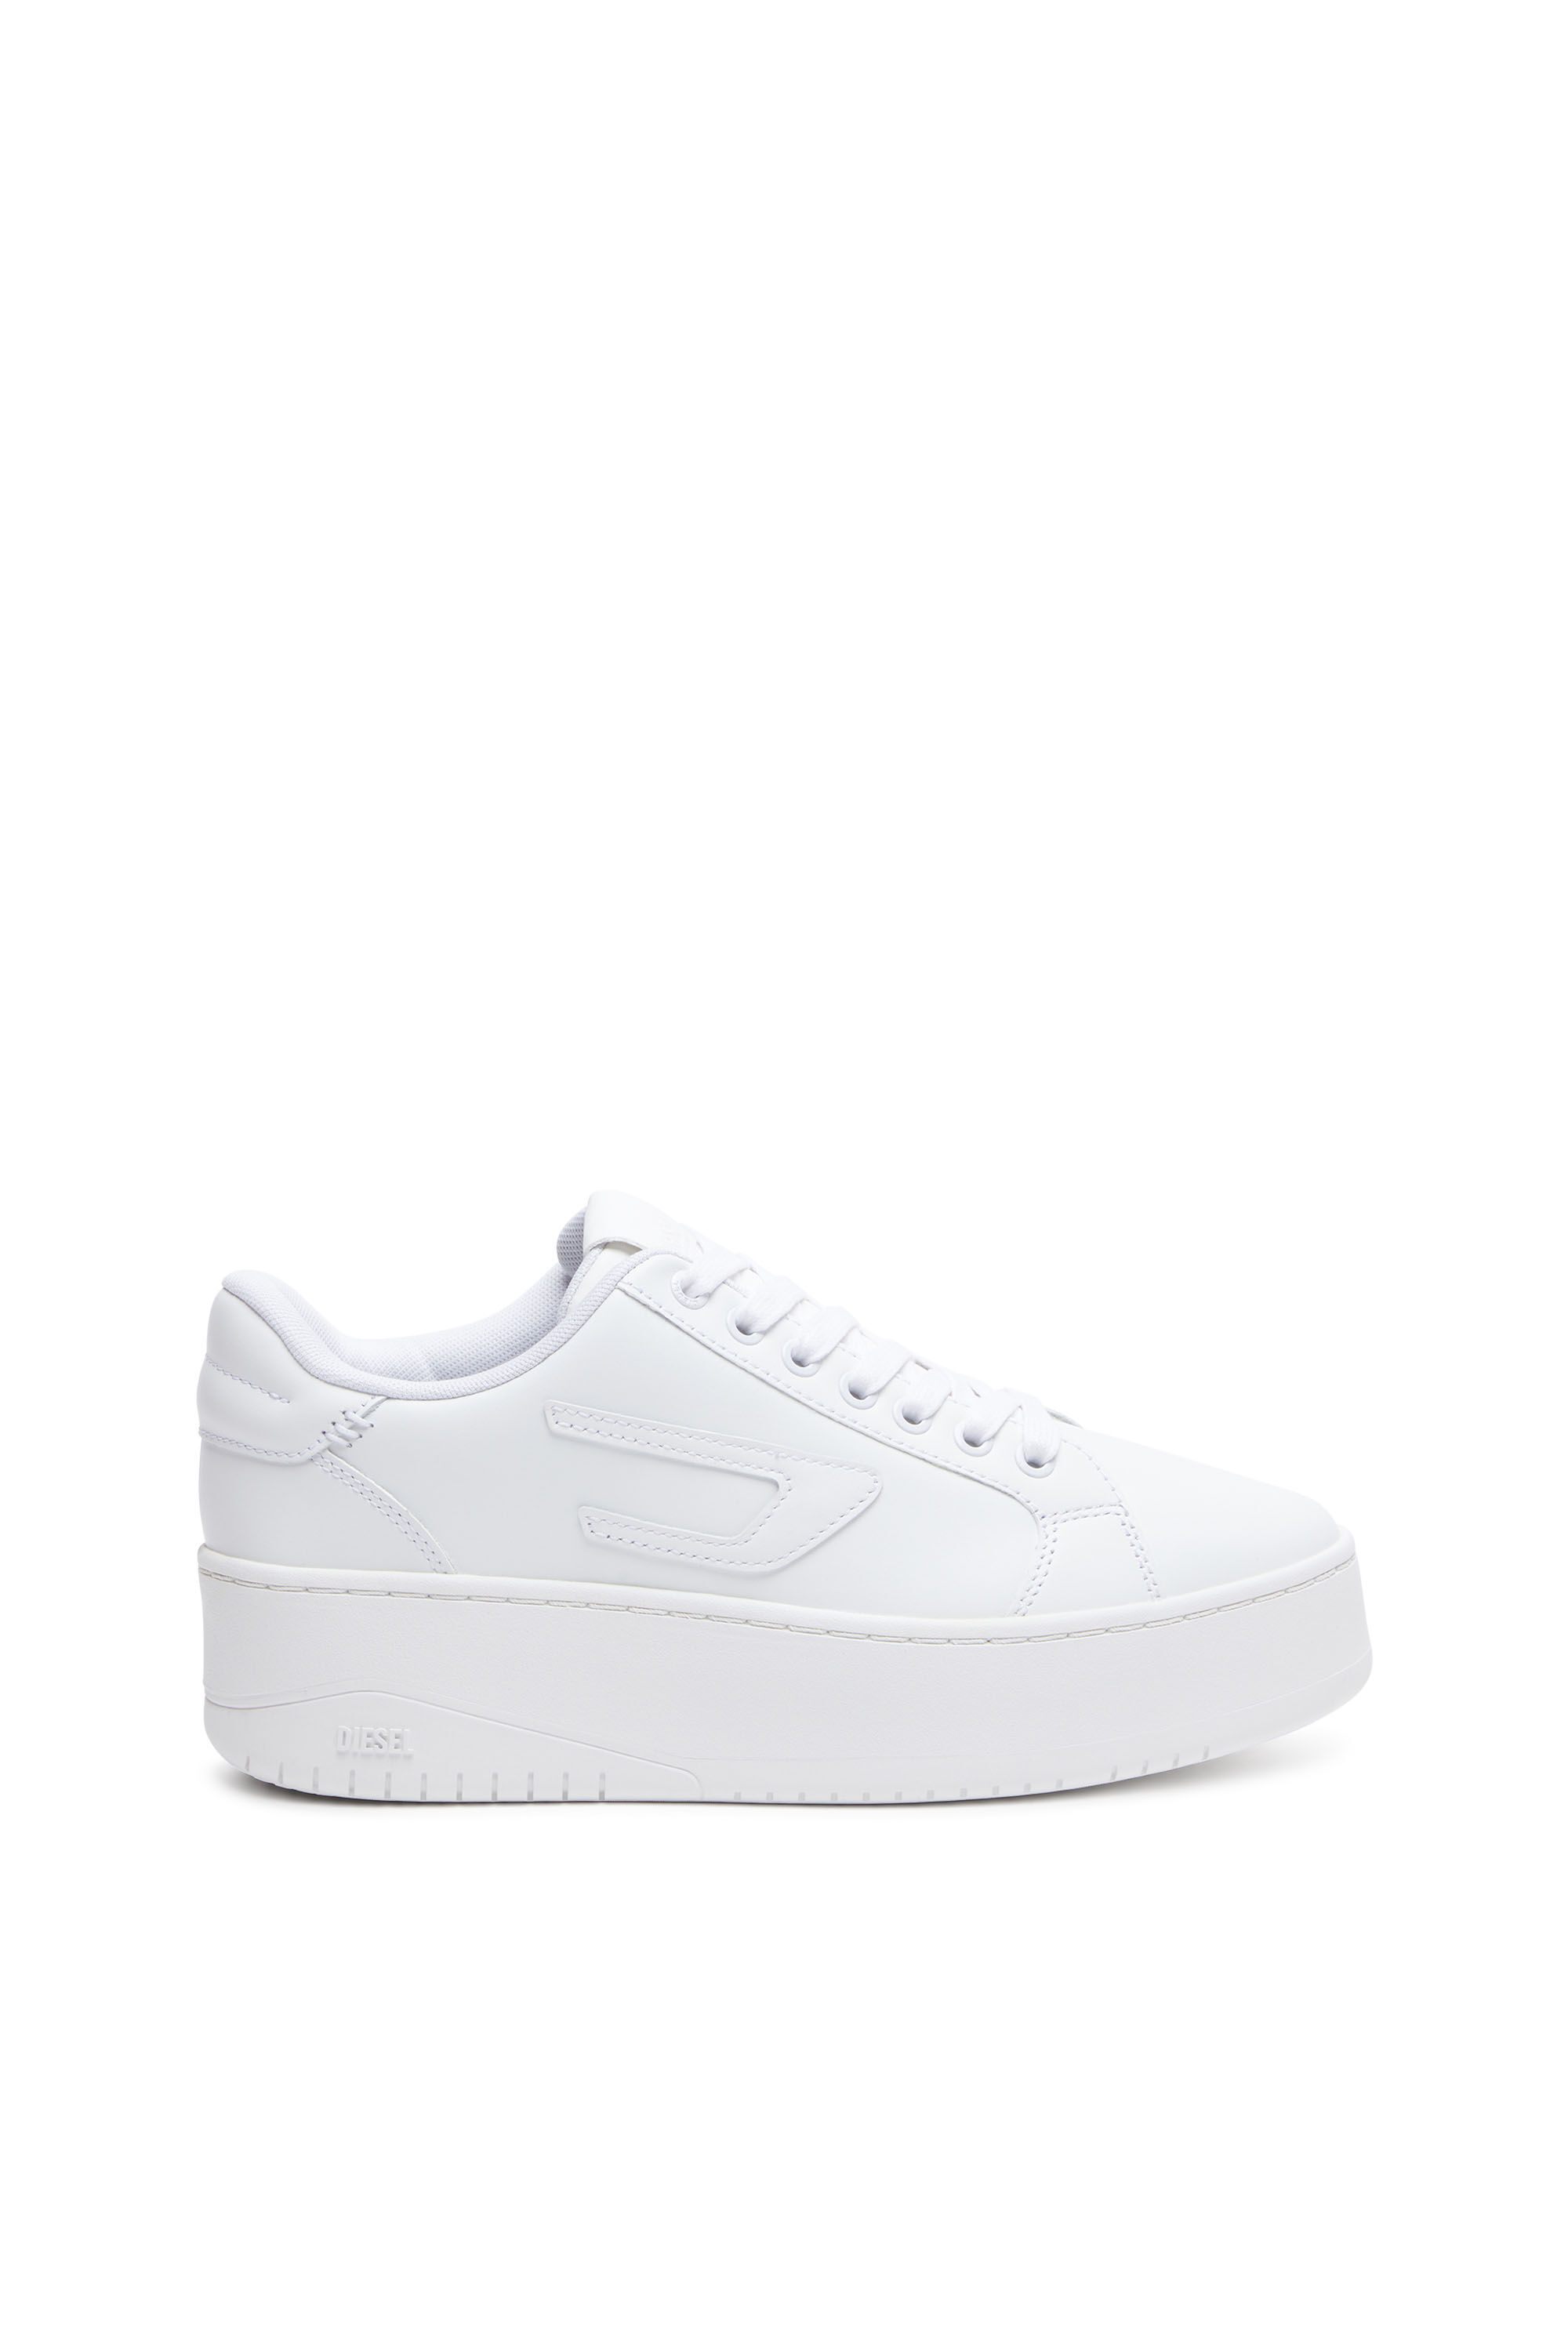 Diesel - S-ATHENE BOLD X, Woman S-Athene Bold-Flatform sneakers in leather in White - Image 1